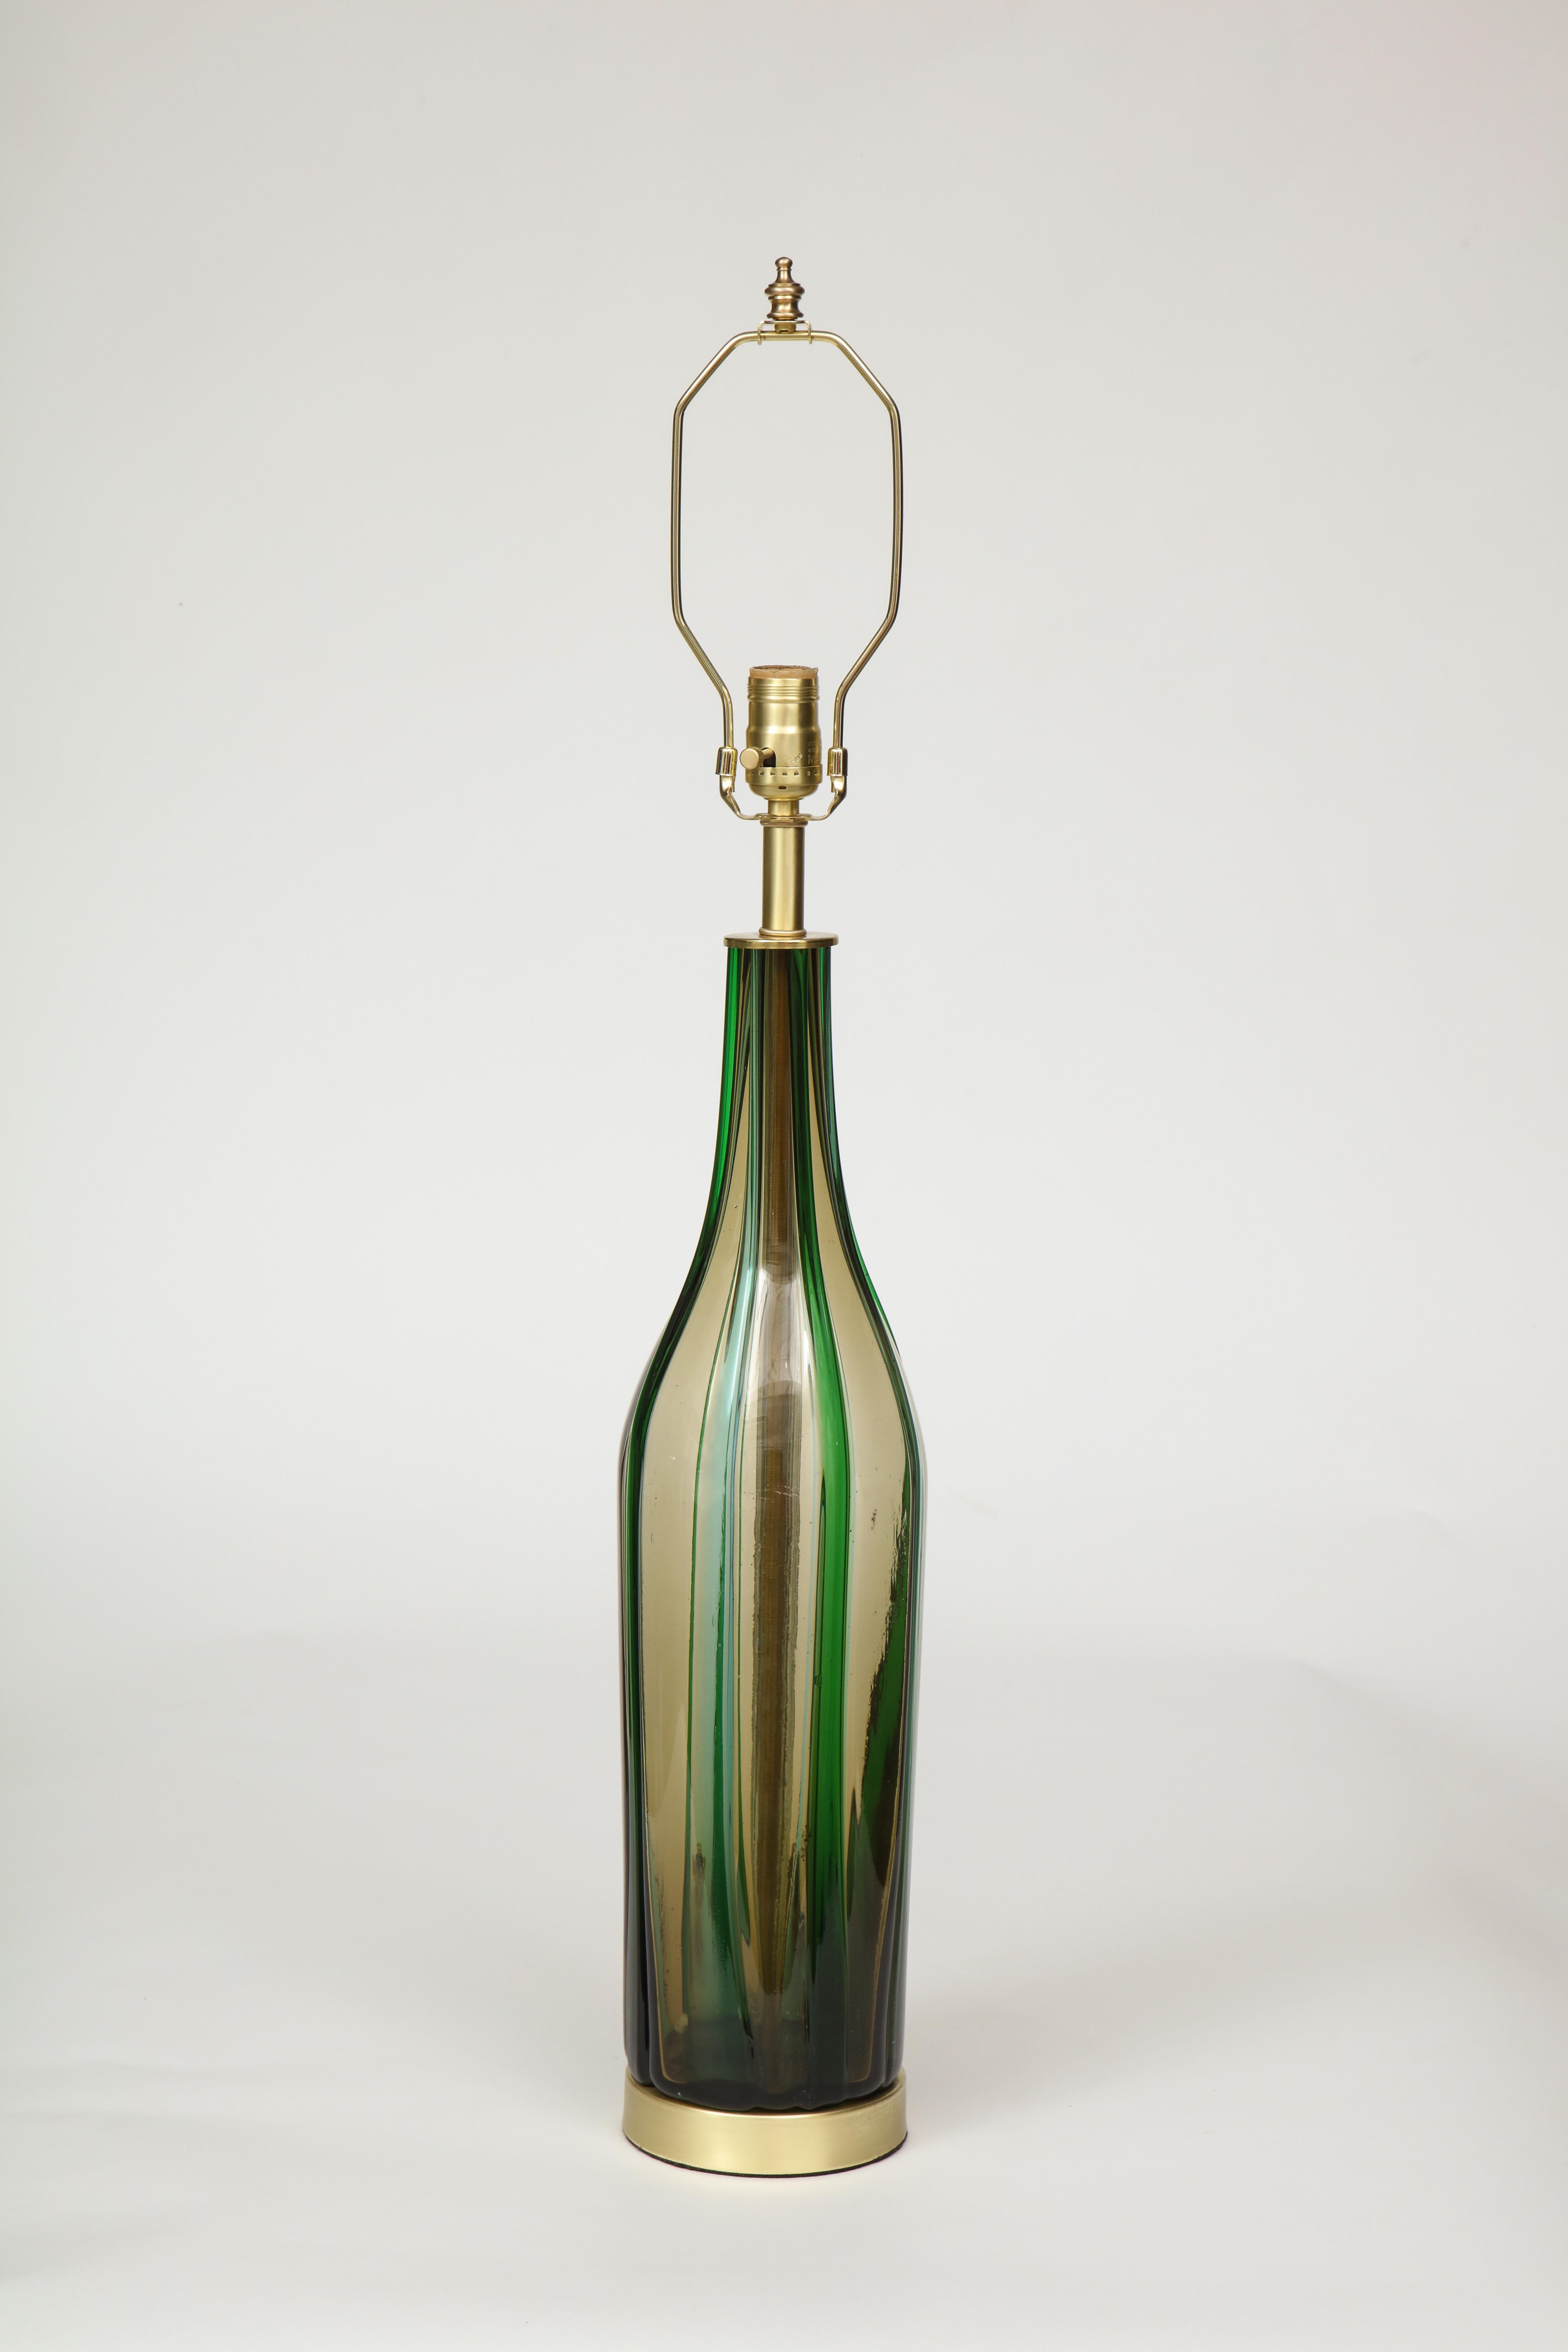 Pair of bottle form Murano glass lamps in olive green with applied vertical stripes, sitting on satin brass bases. Rewired for use in the USA, 100W max bulbs.